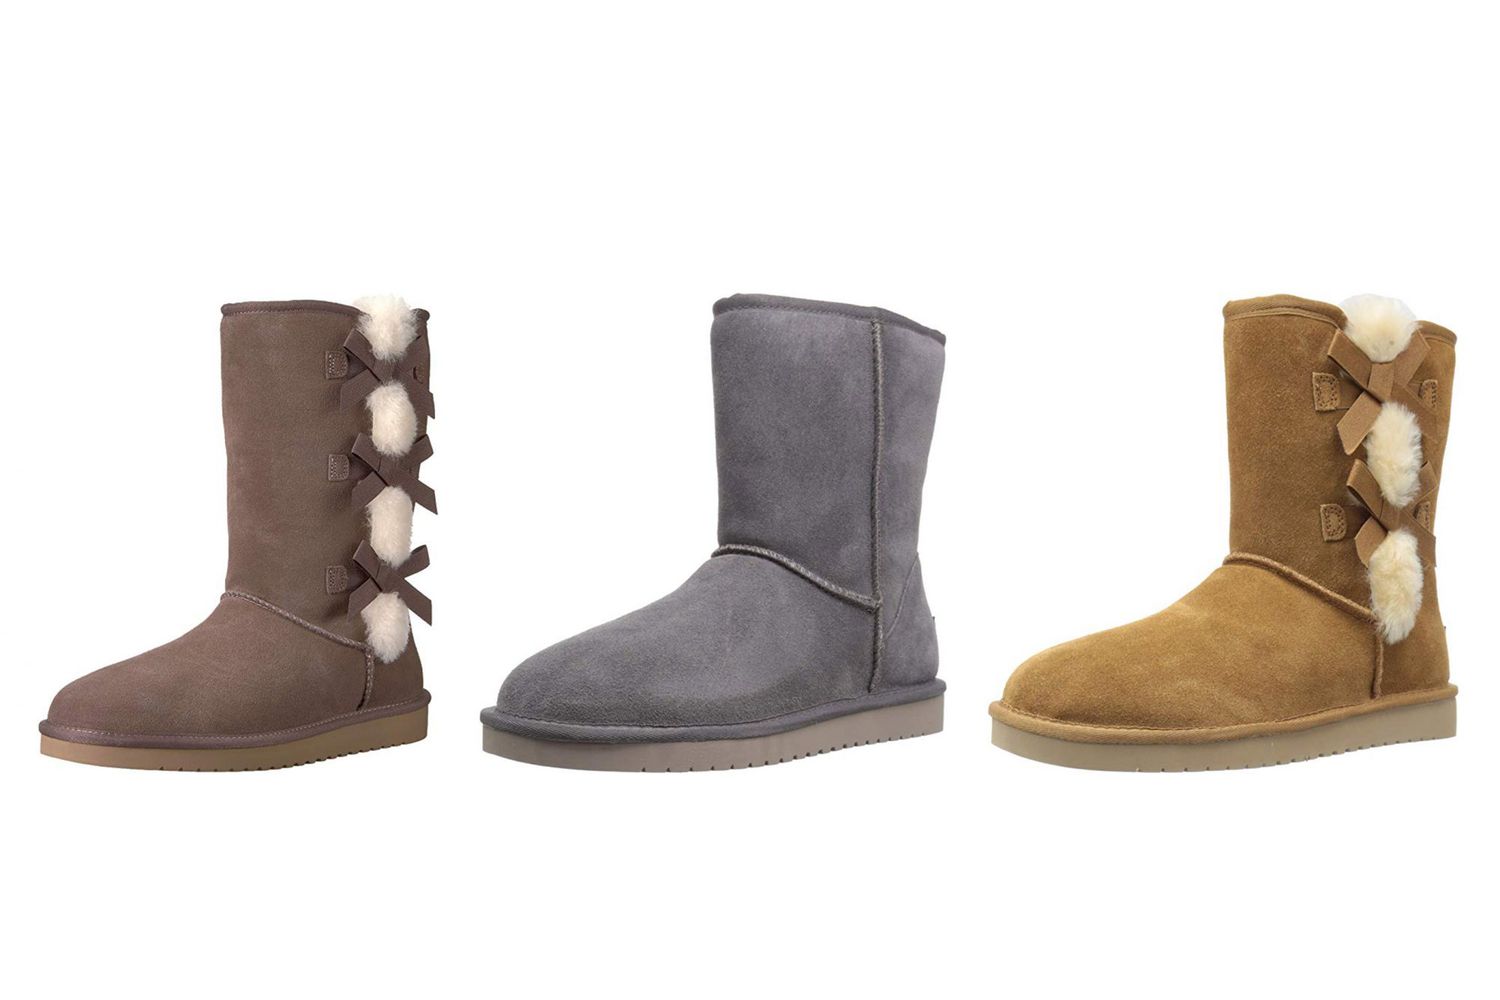 Koolaburra by Ugg Boots and Slippers 